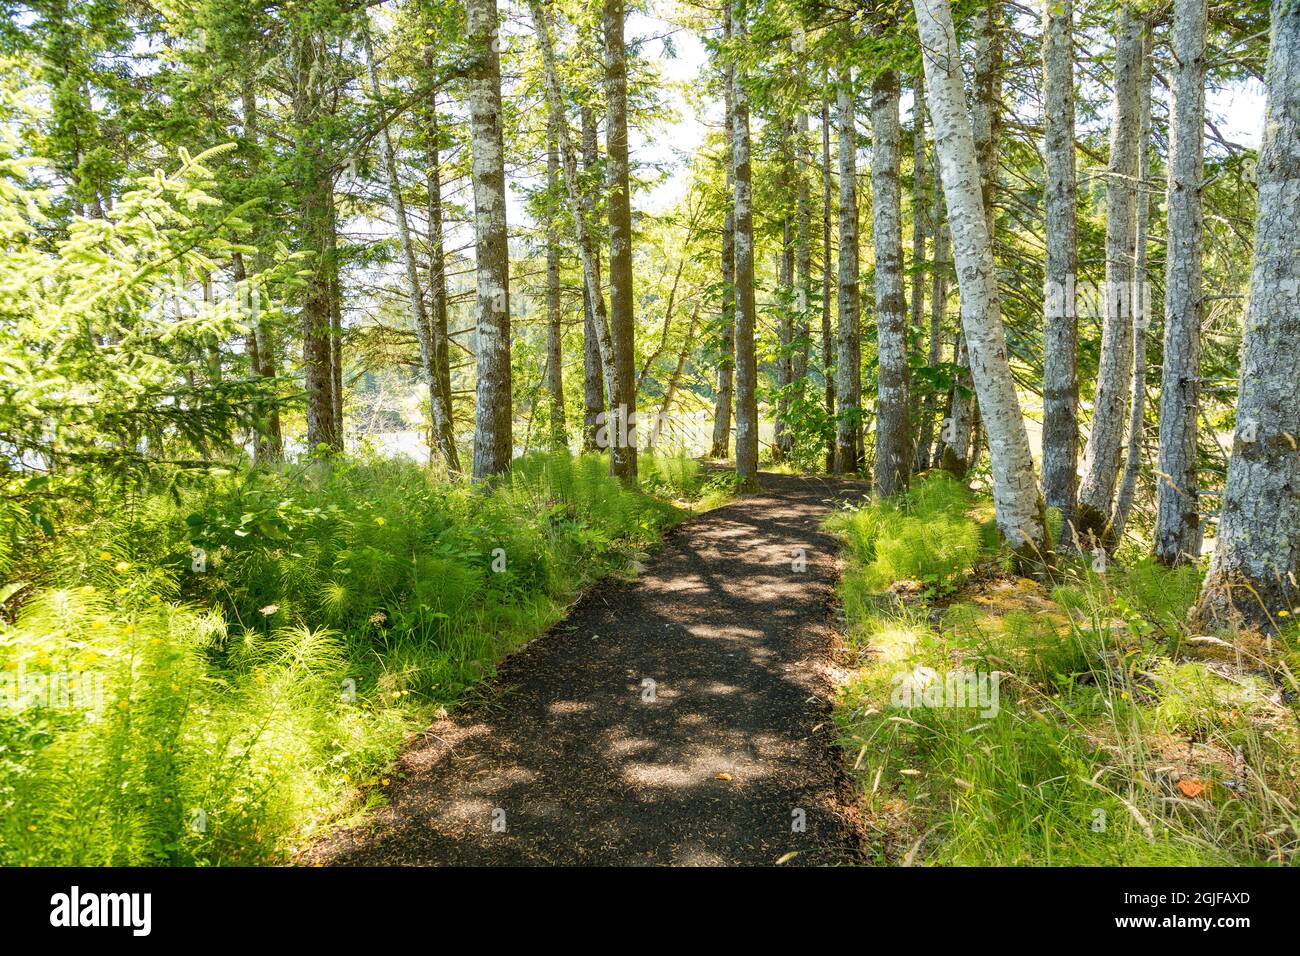 USA, Washington State, Megler. Path along the North Shore of the Columbia River. Fir, maple and red alder trees. Stock Photo